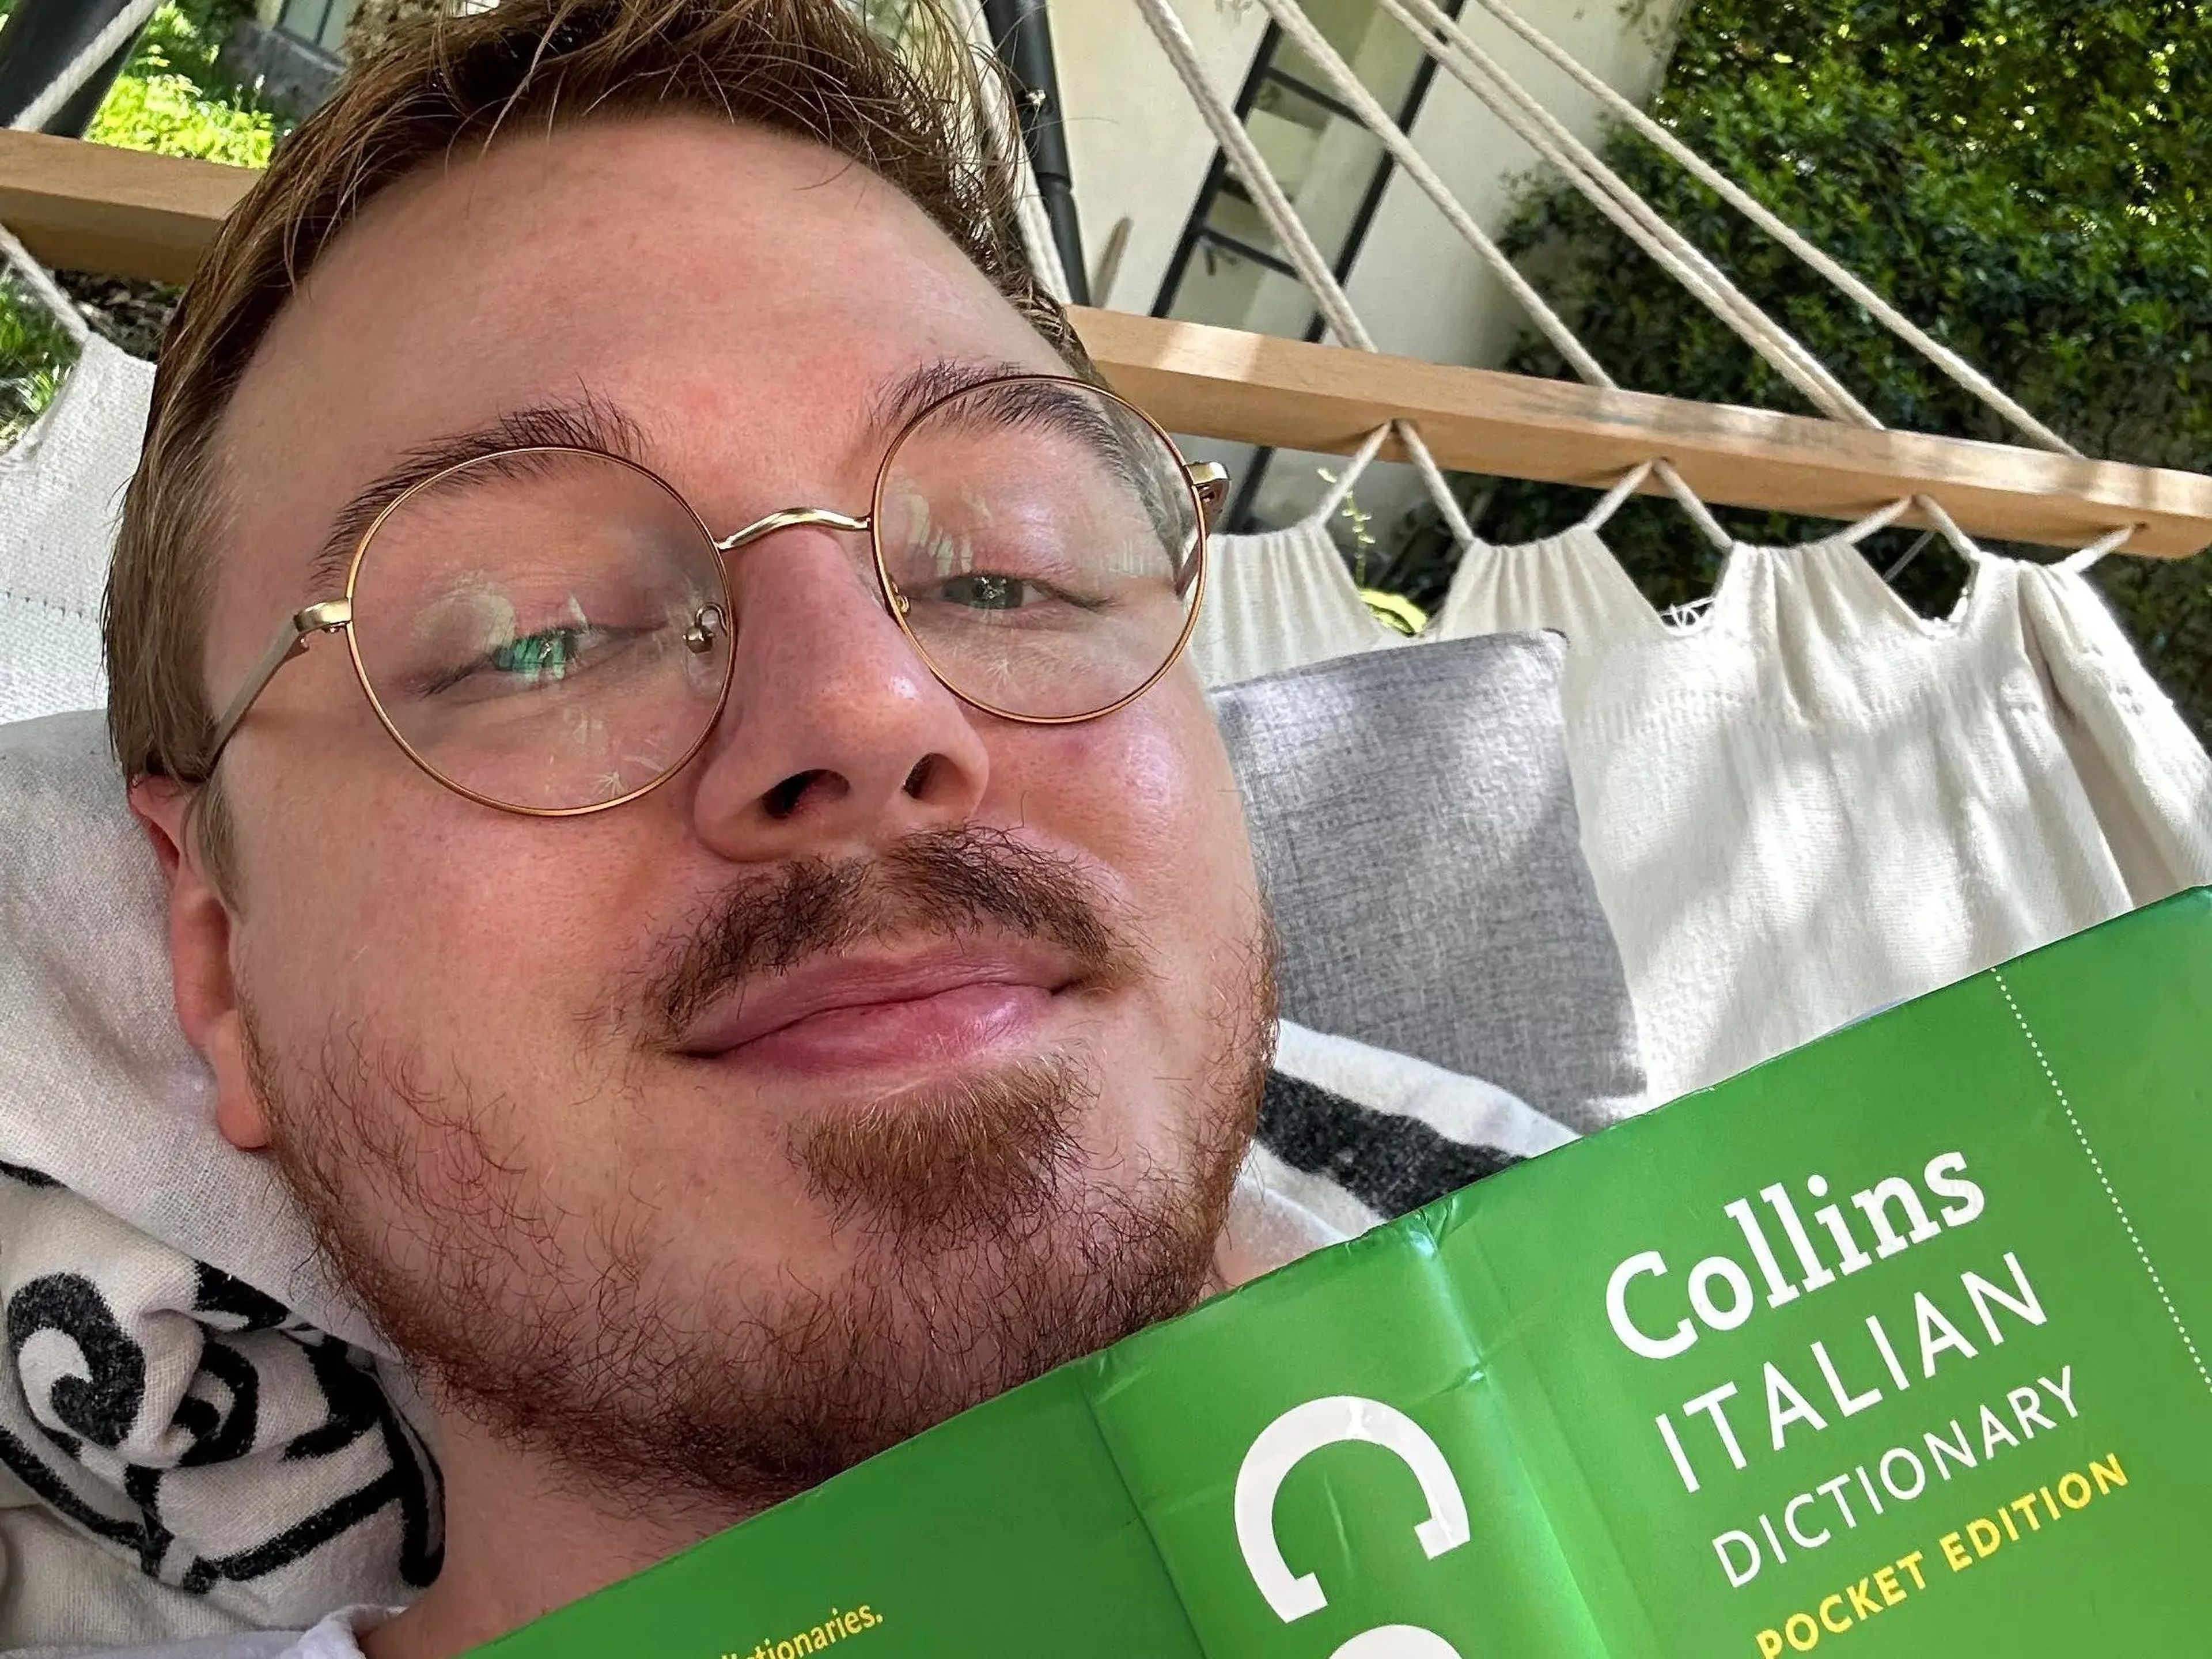 Man with glasses on a hammock holding a green Italian dictionary.